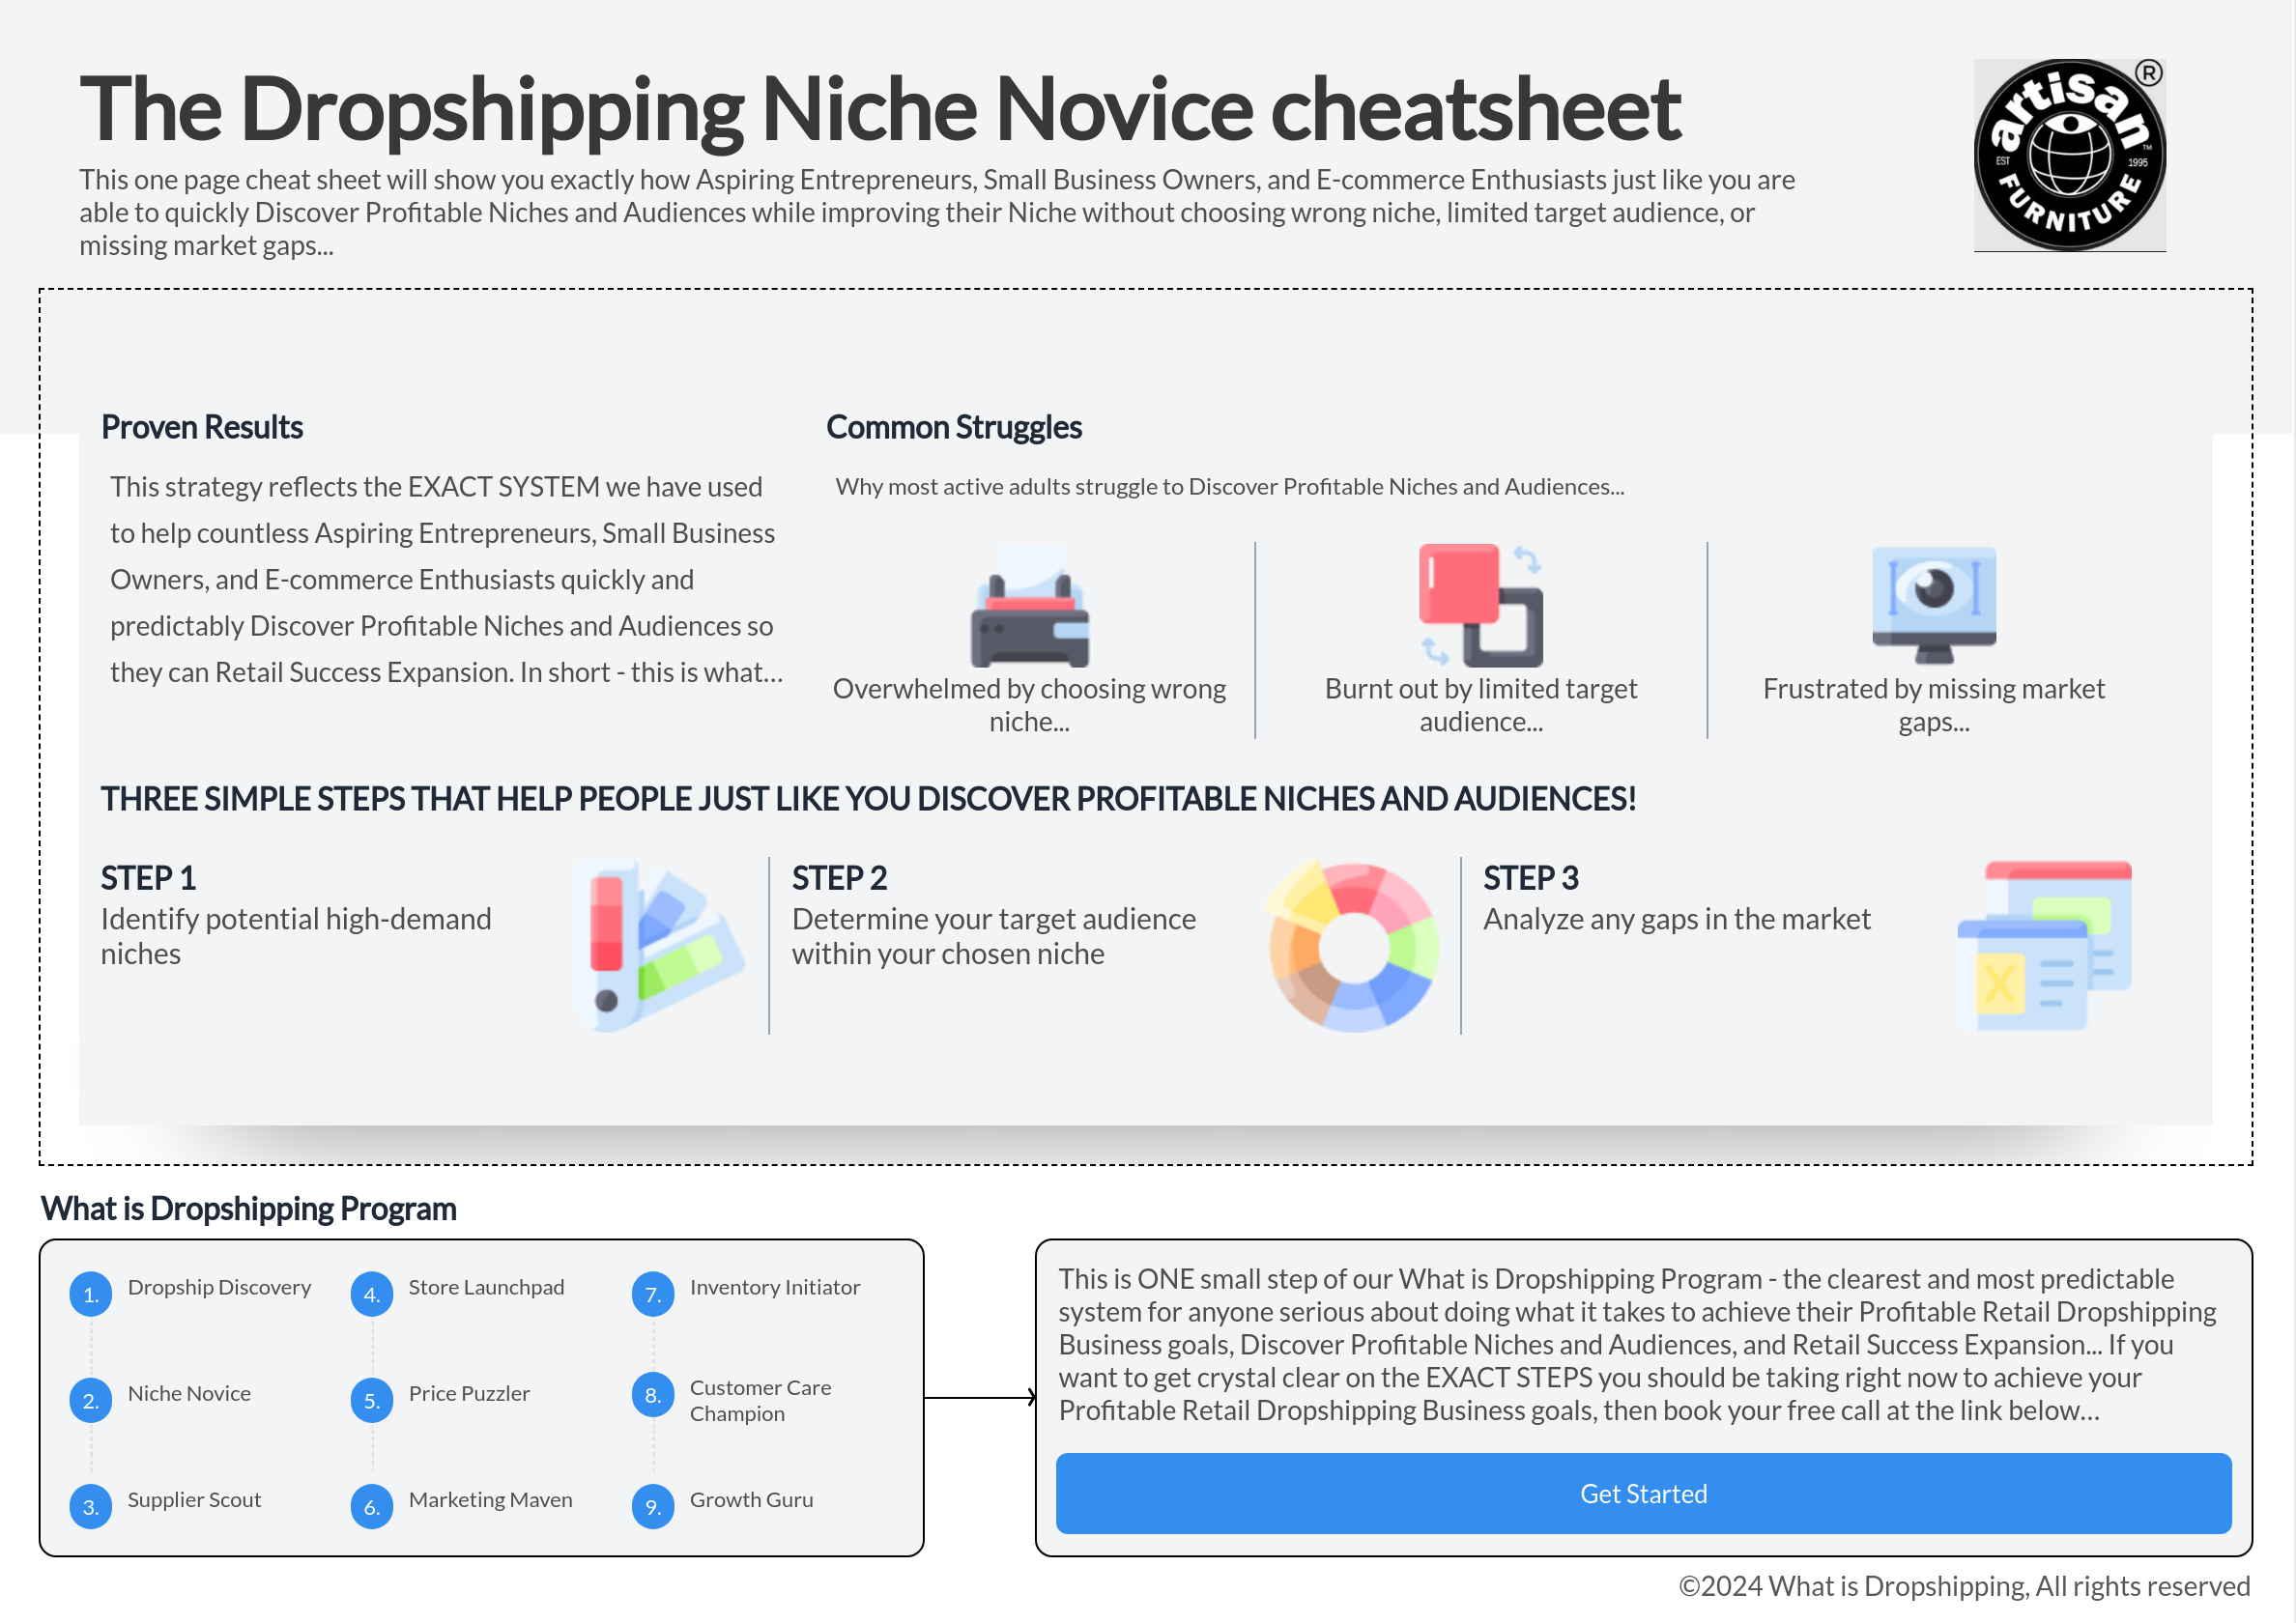 Guide to finding profitable dropshipping niches and audiences.